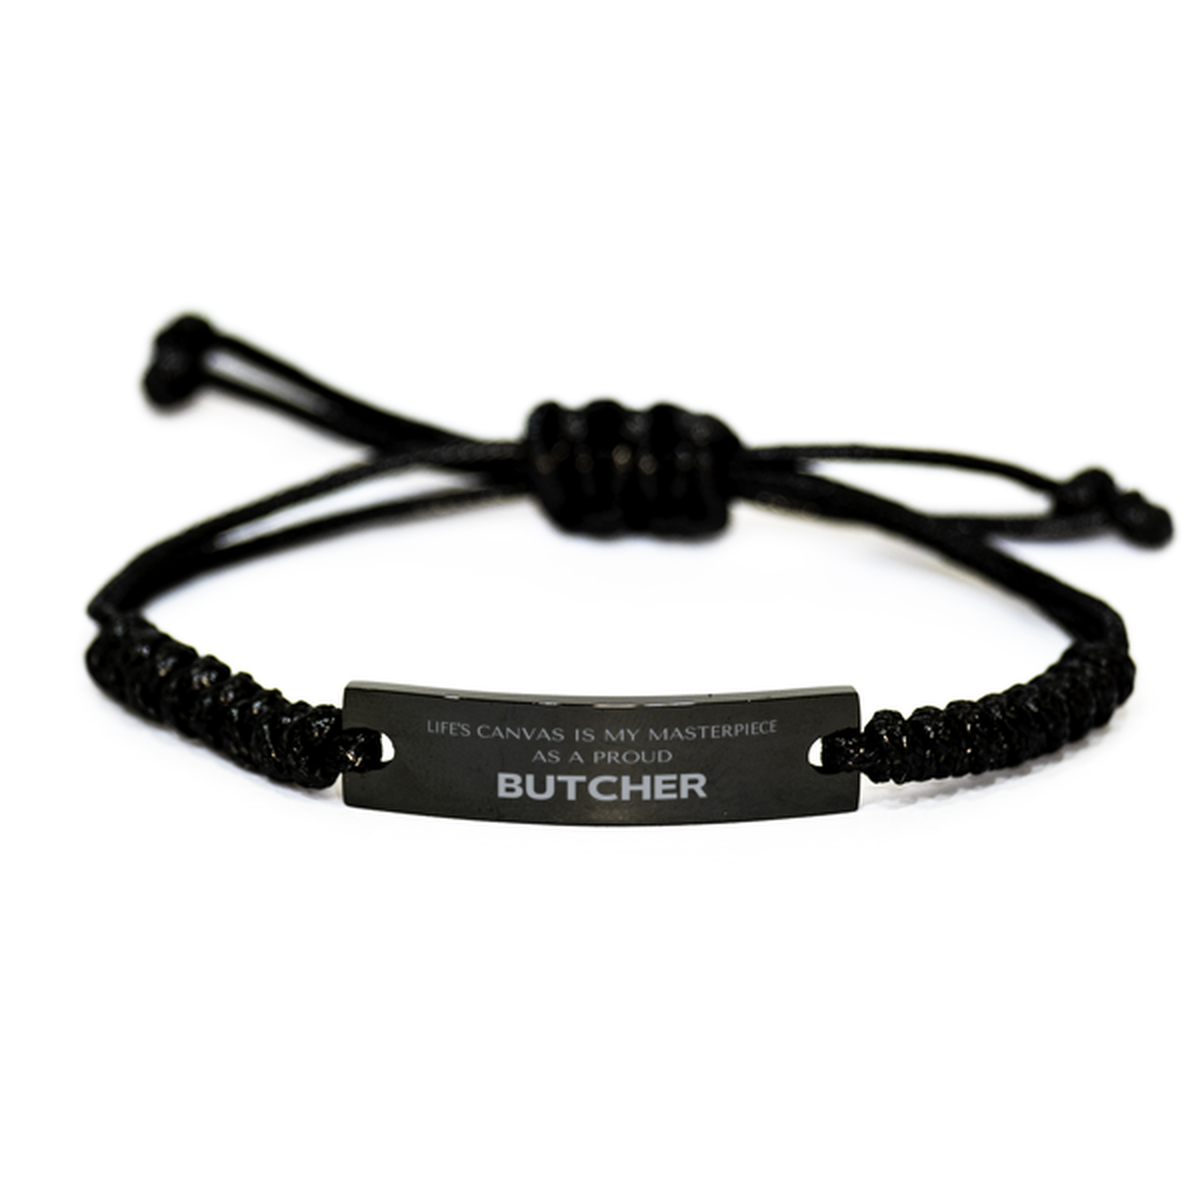 Proud Butcher Gifts, Life's canvas is my masterpiece, Epic Birthday Christmas Unique Black Rope Bracelet For Butcher, Coworkers, Men, Women, Friends